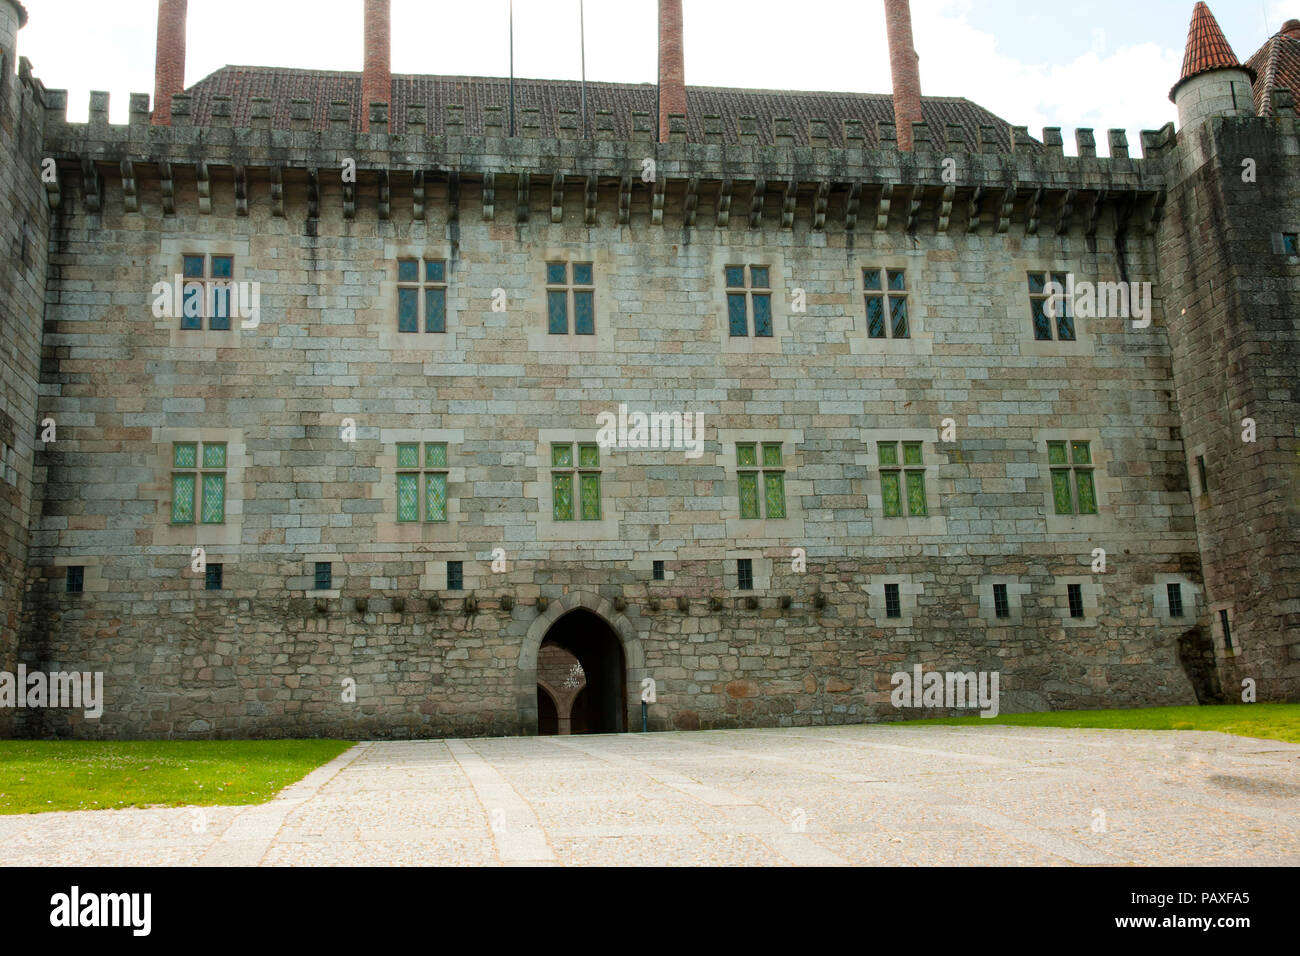 Palace of the Dukes of Braganza - Guimaraes - Portugal Stock Photo